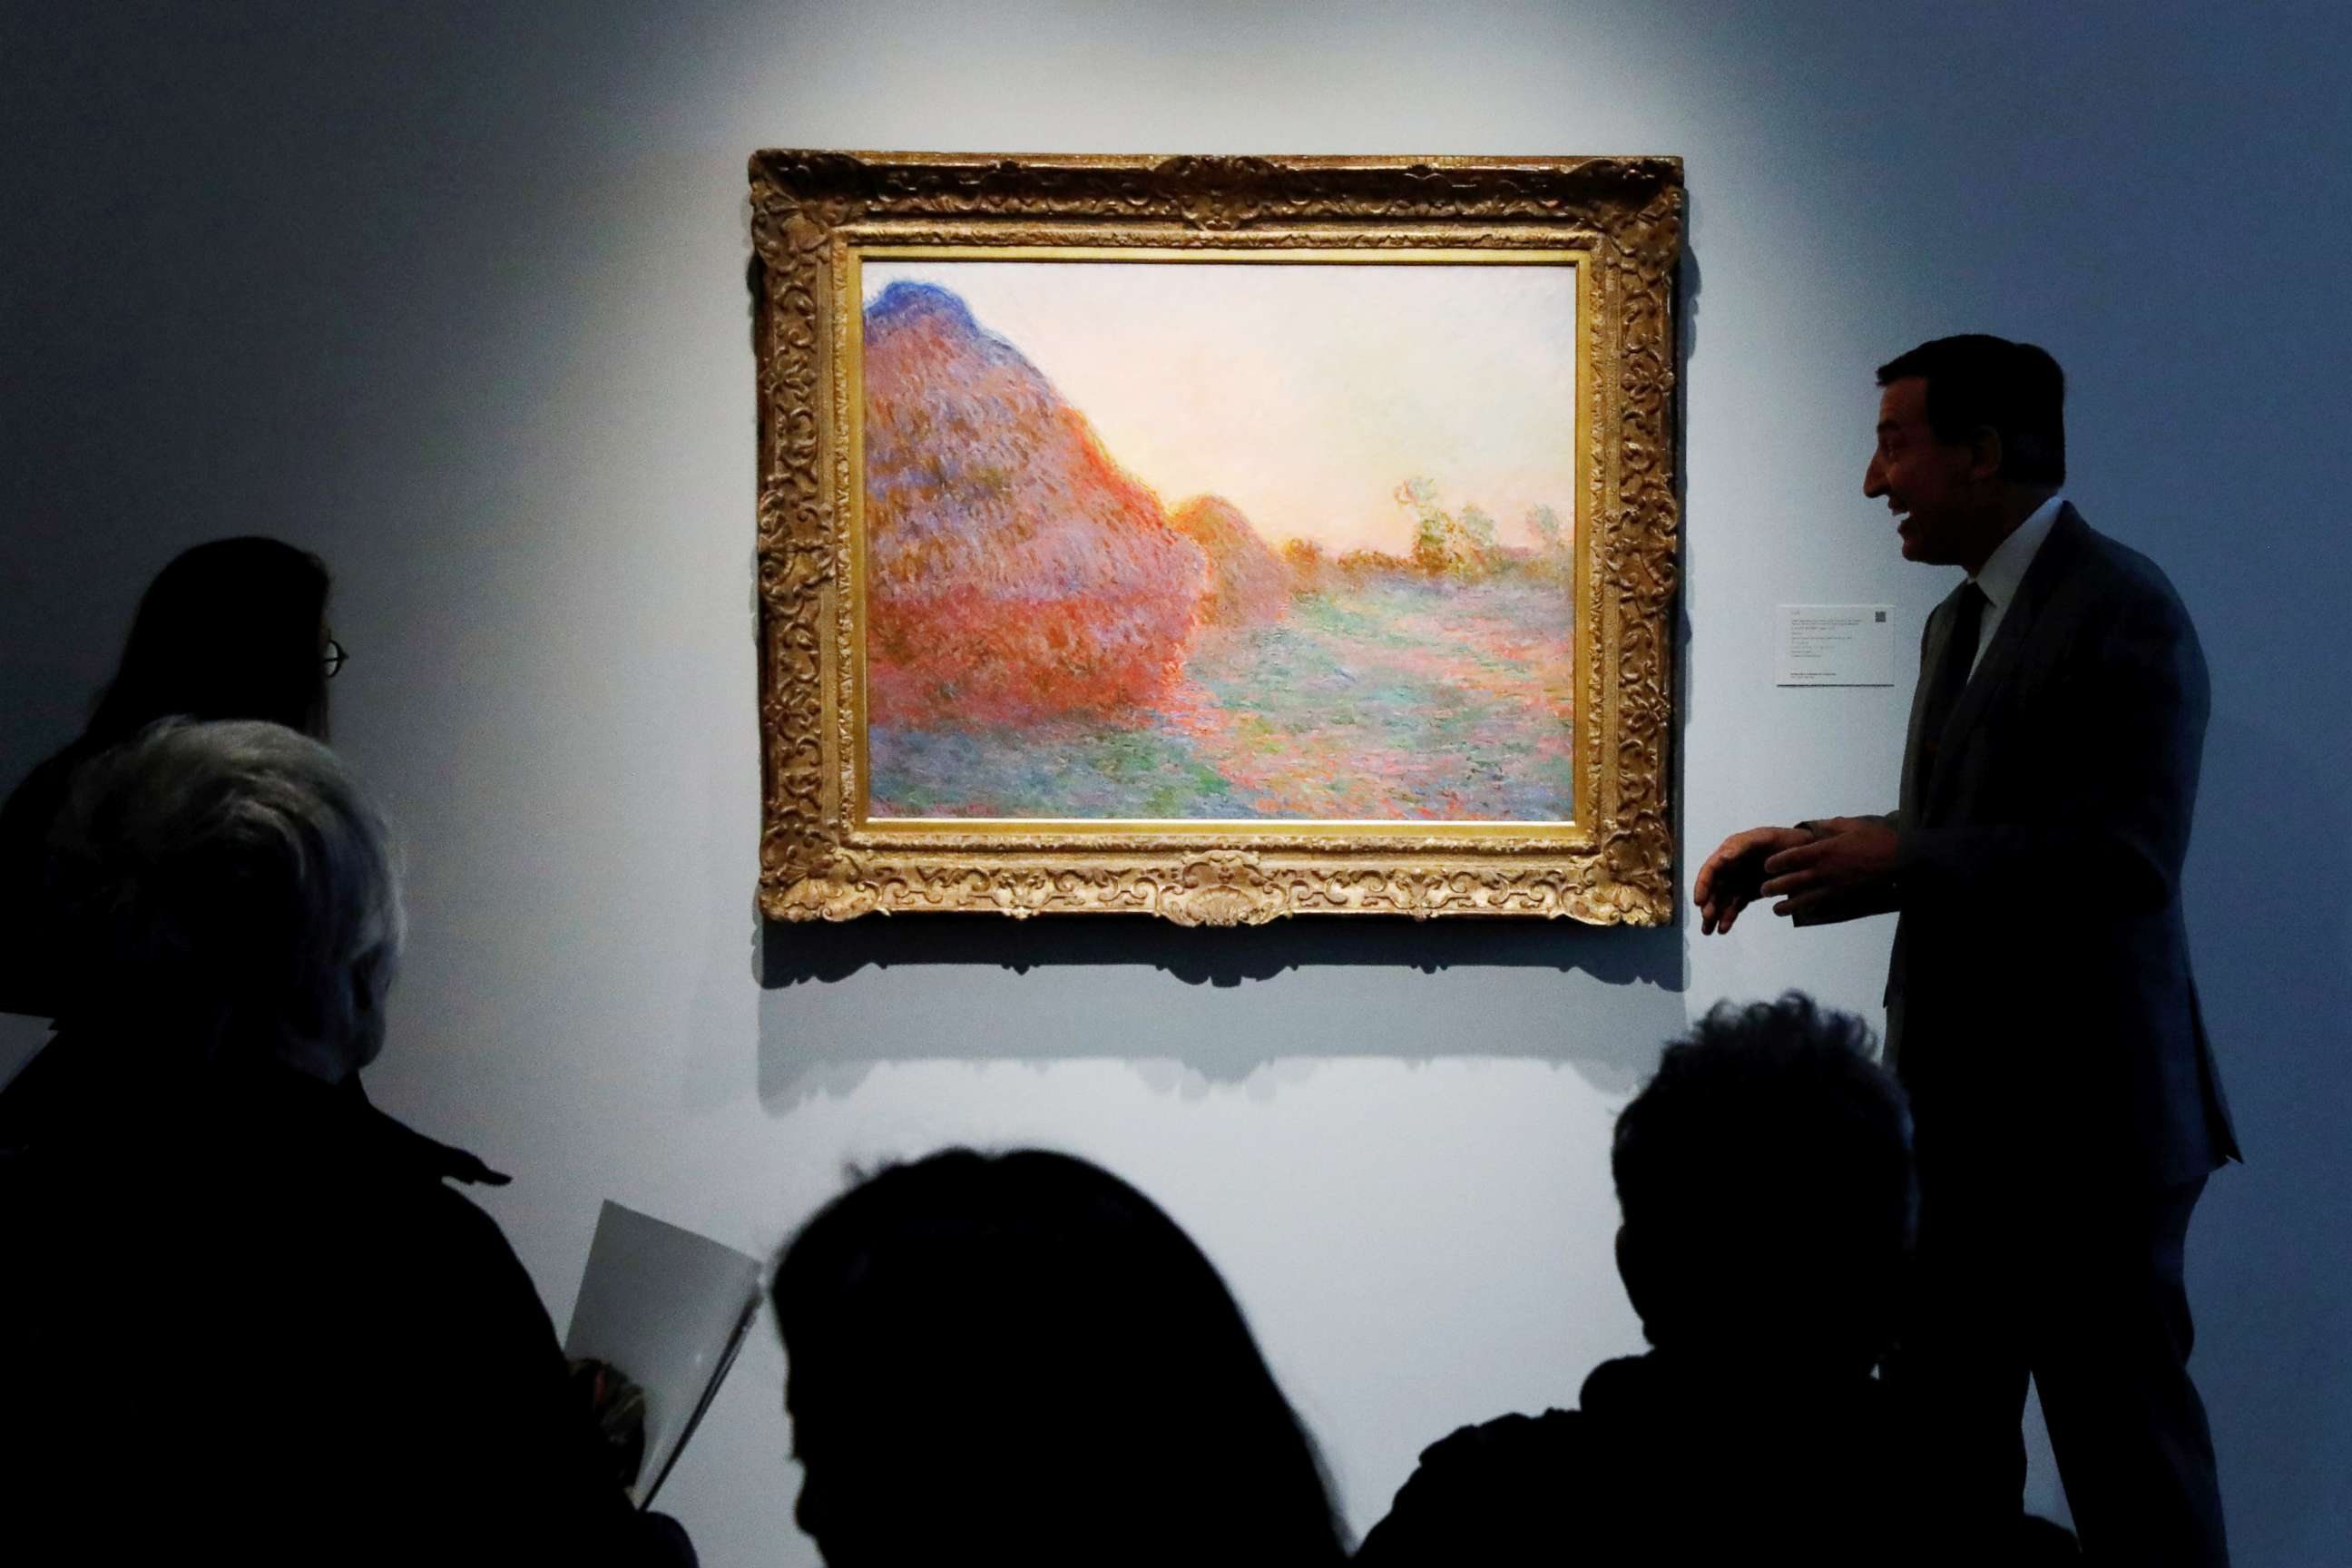 PHOTO: The painting by Claude Monet, part of the Haystacks "Les Meules" series is displayed at Sotheby's during a press preview of their upcoming impressionist and modern art sale in New York, May 3, 2019.